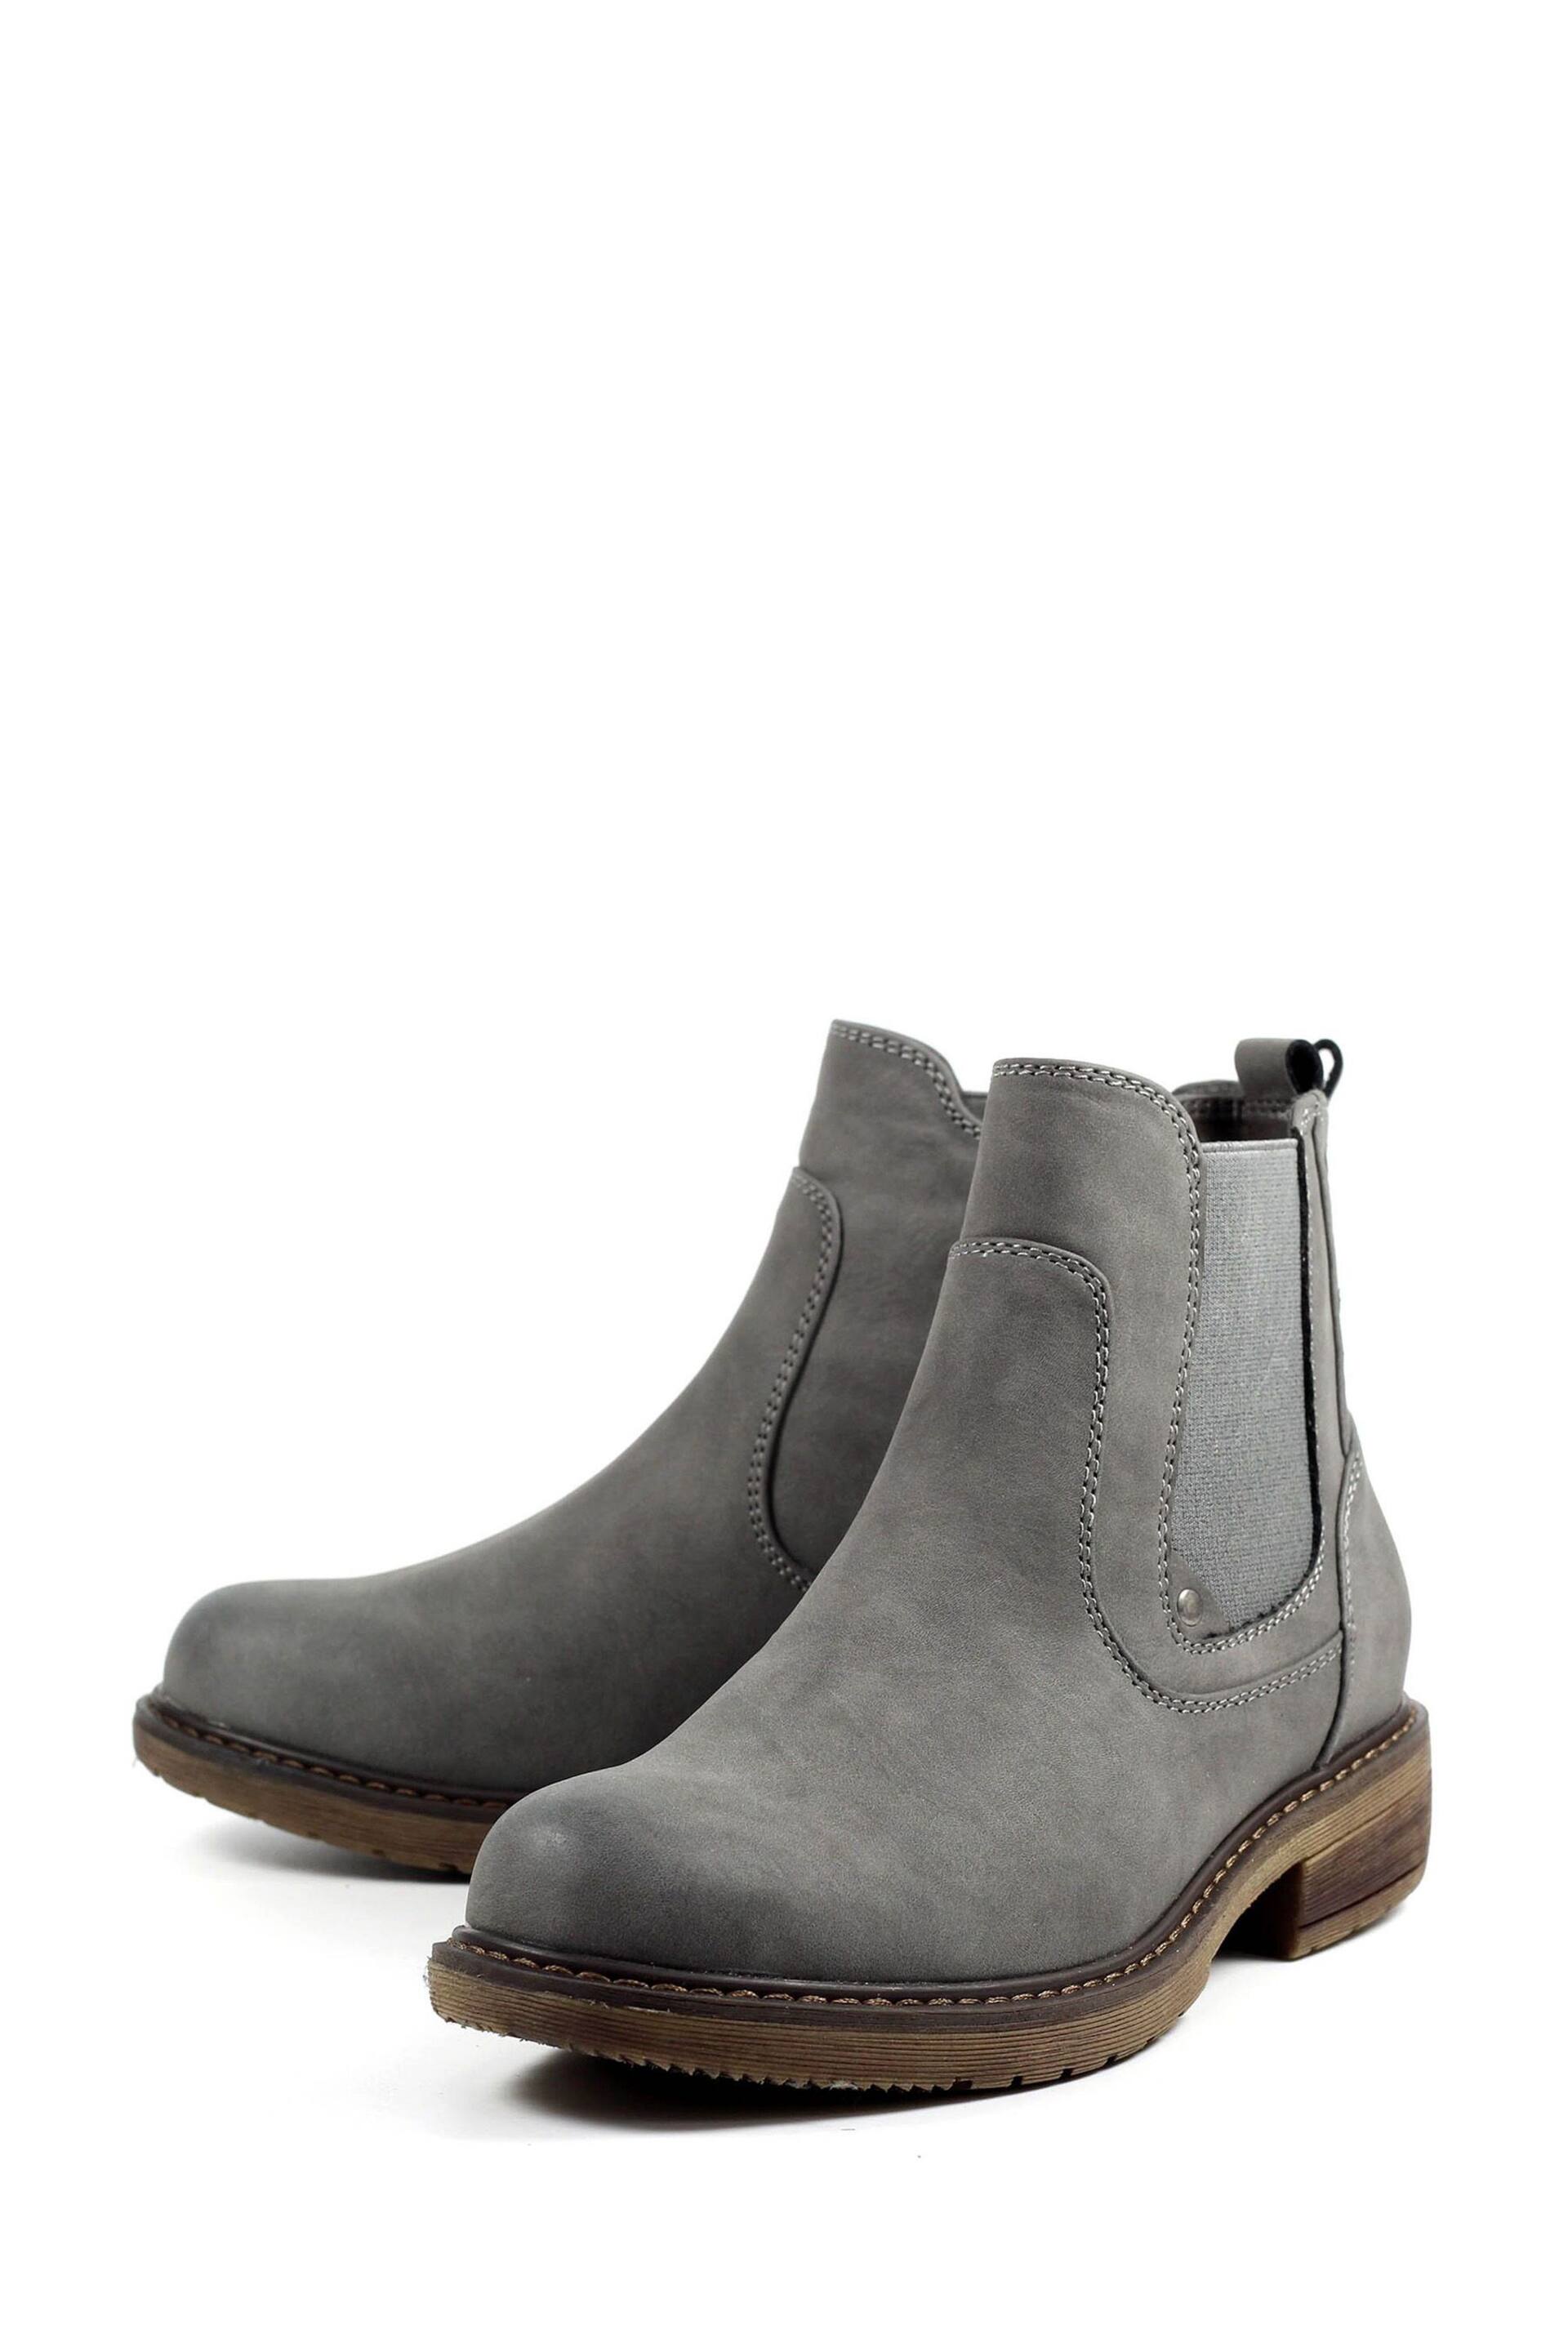 Lunar Roxie II Ankle Boots - Image 6 of 8